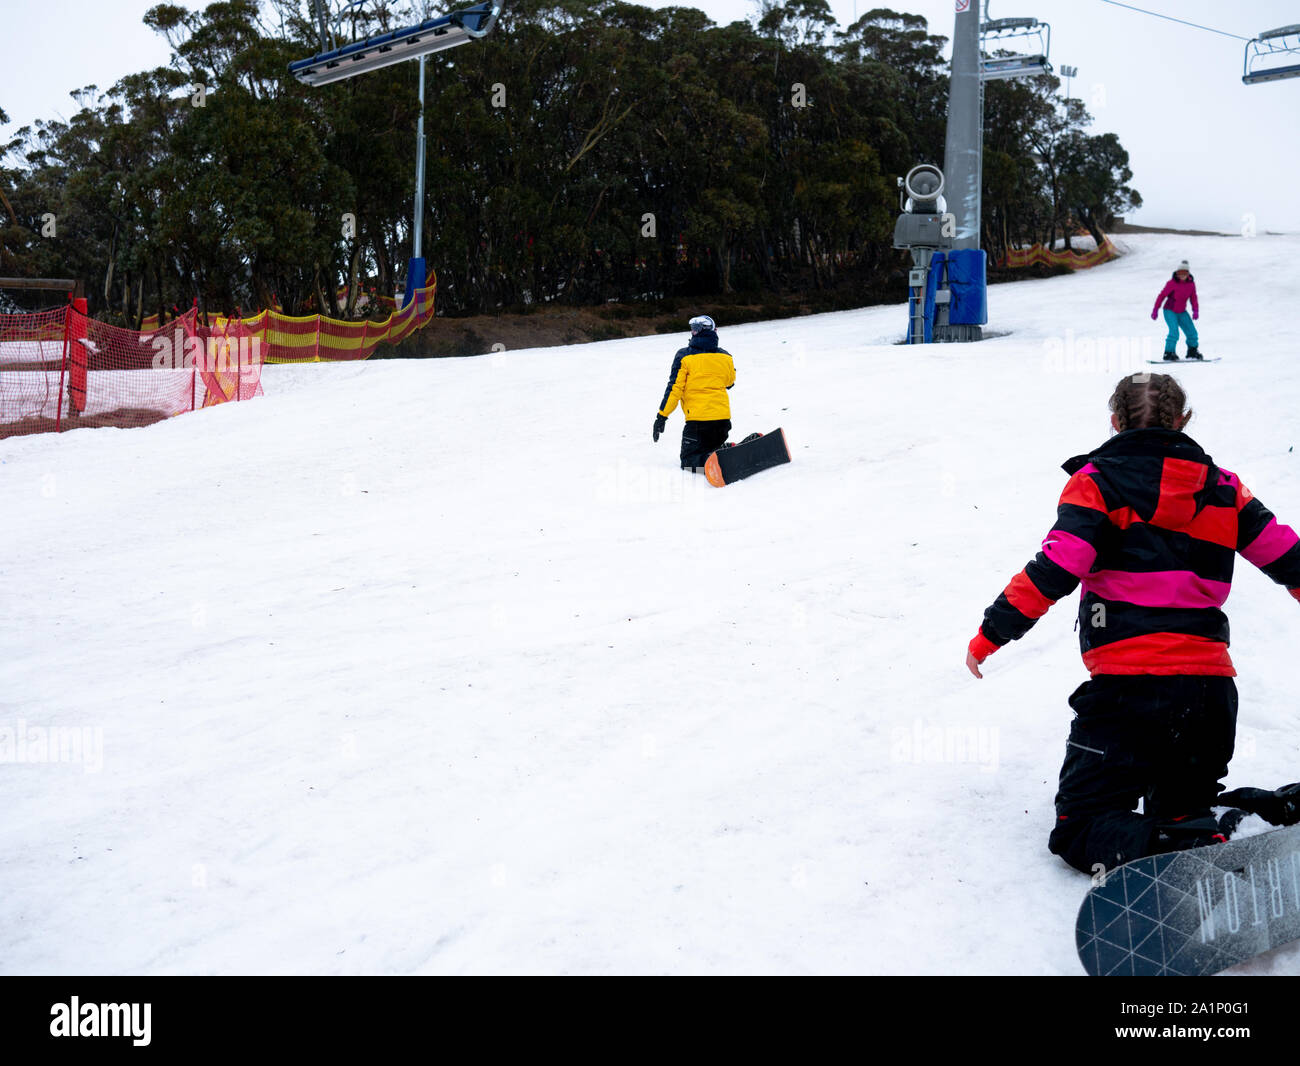 People skiing on snow in Mount Stiling Forest, Saturday 21 September 2019, Australia. Stock Photo